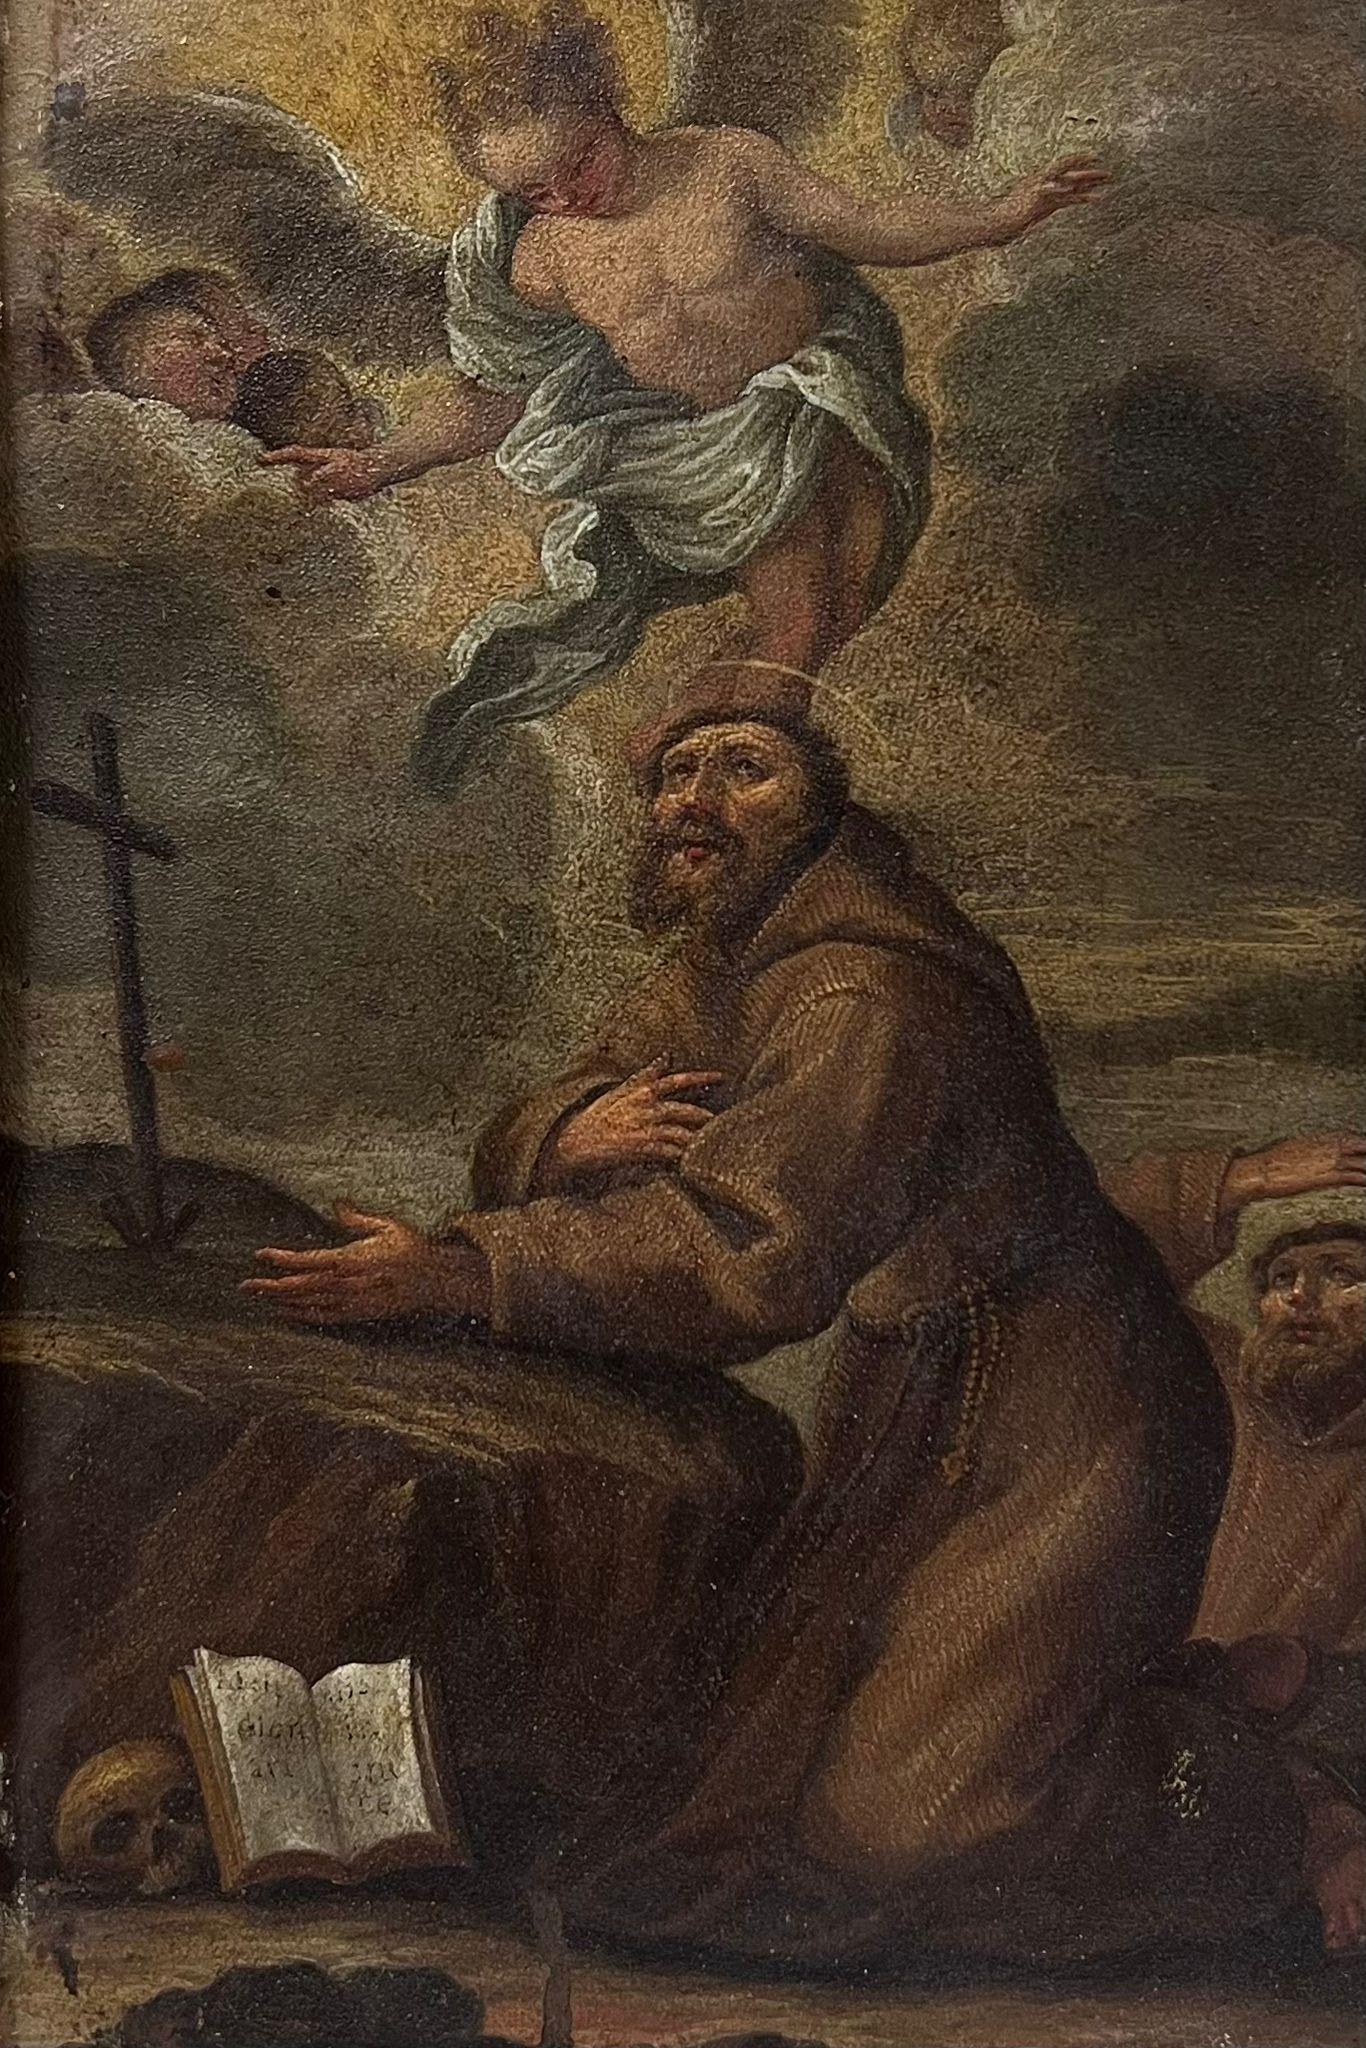 Penitent Saint in Wilderness with Angels & Cherubs Italian Old Master on Copper